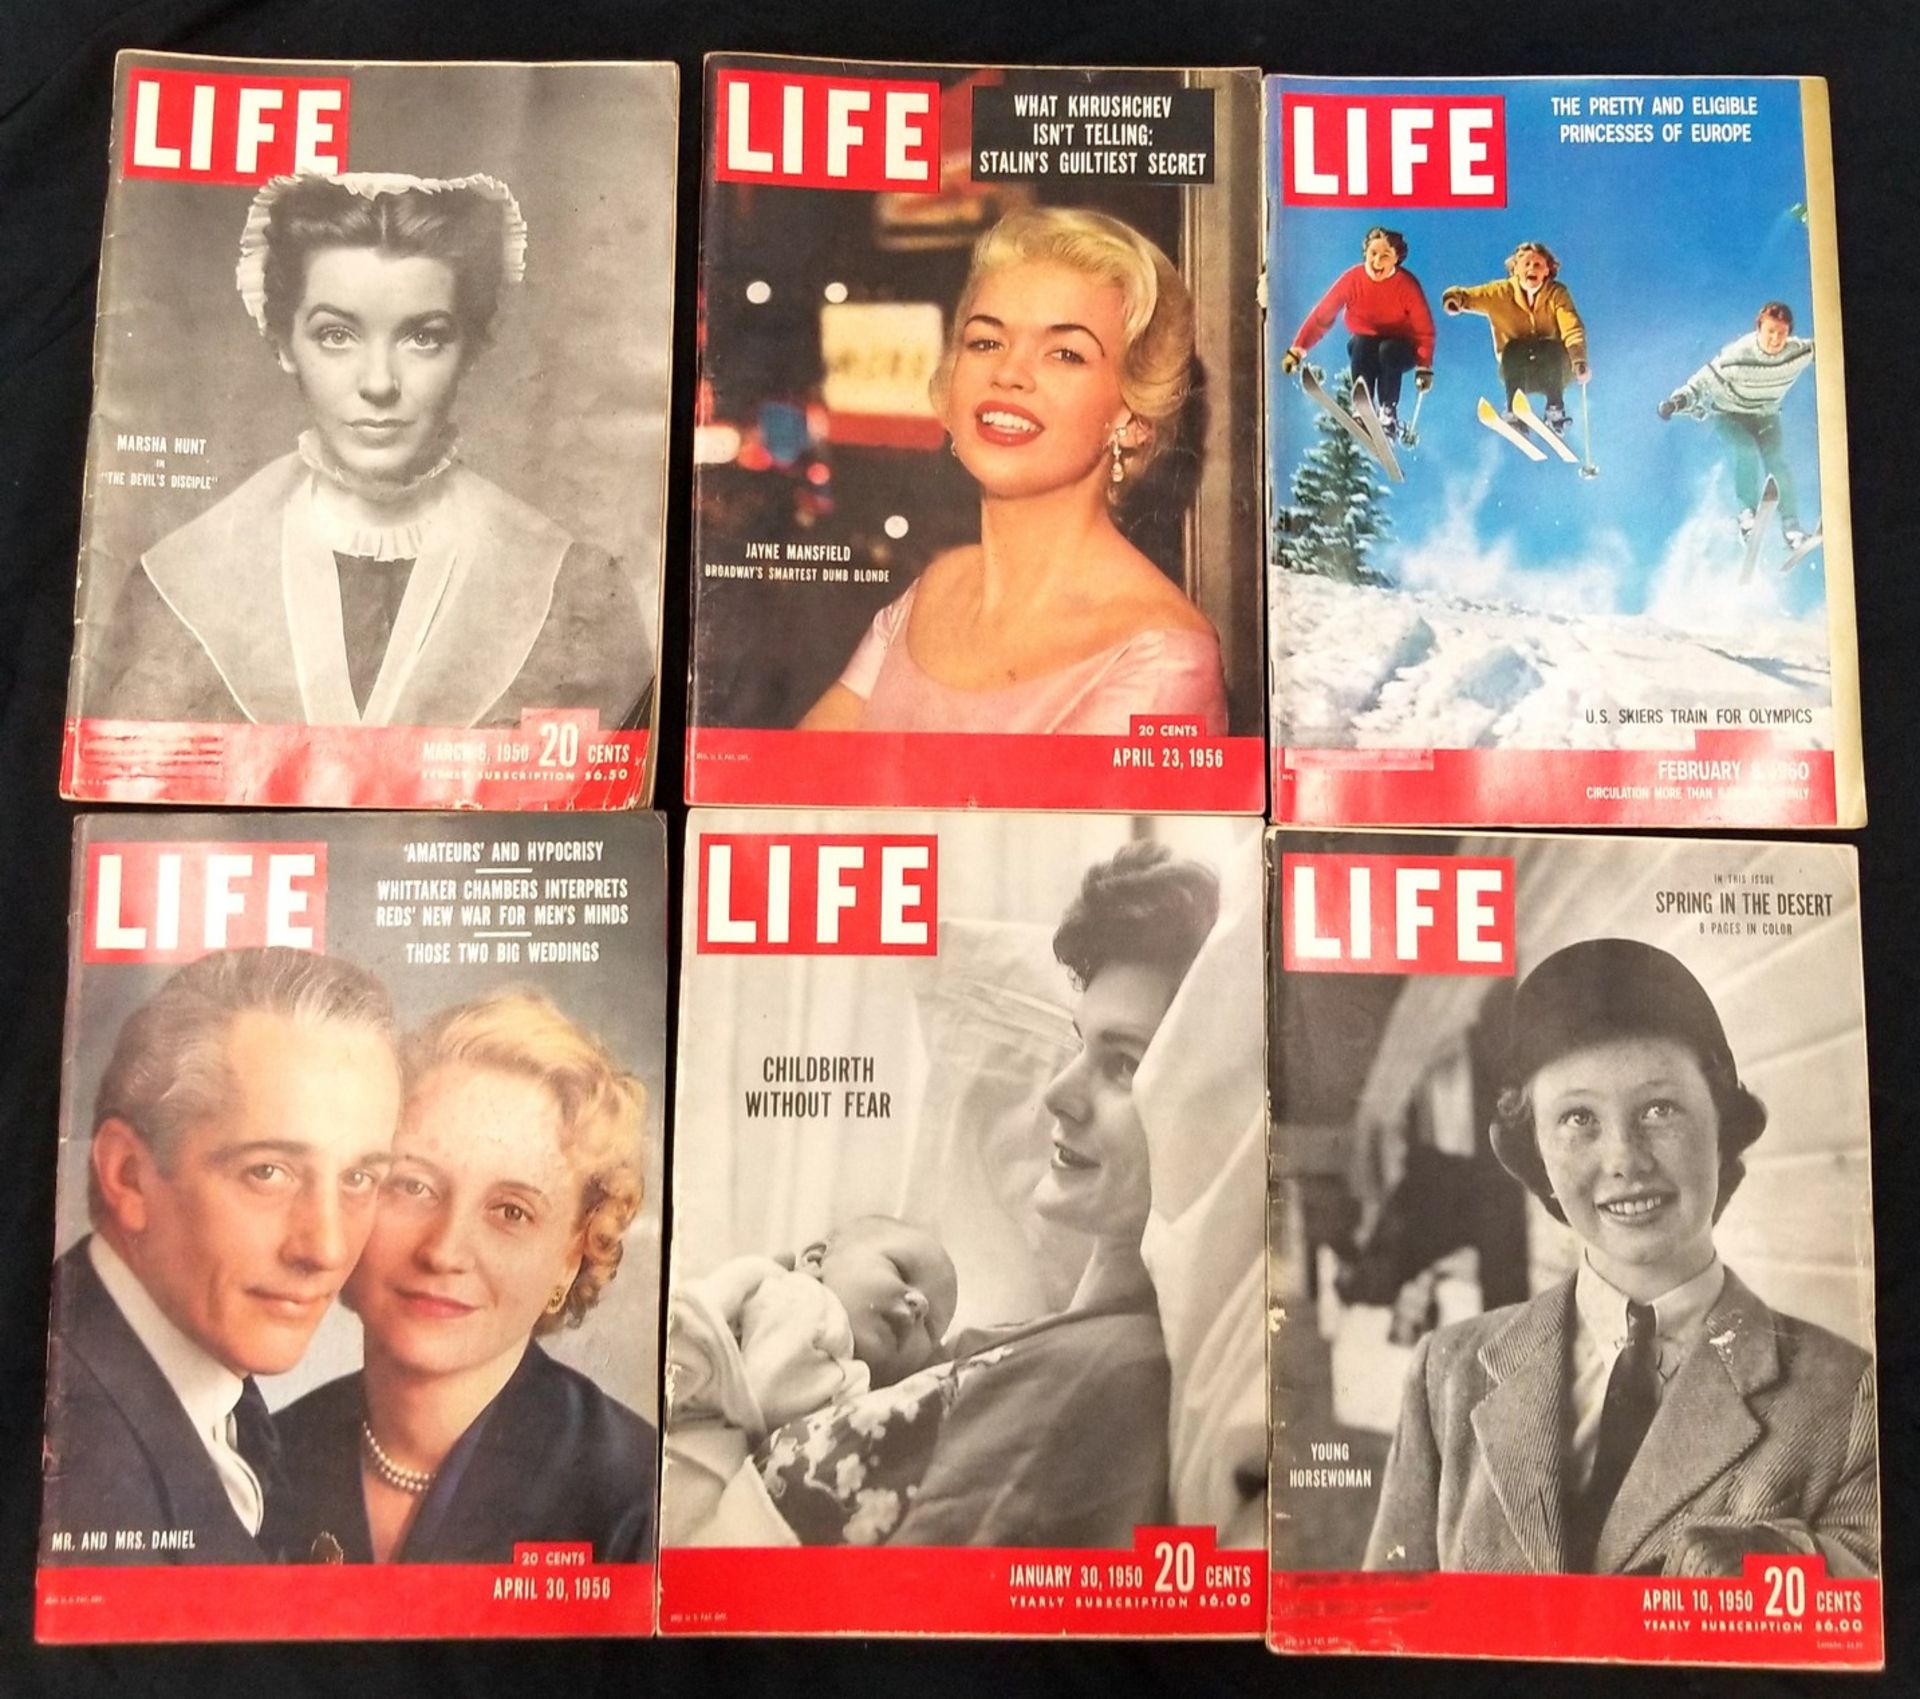 VINTAGE TIME MAGAZINES - APPROX 160 ISSUES - YEARS INDICATED IN PHOTOS - 1950, 1956, 1960, 1961, - Image 2 of 6